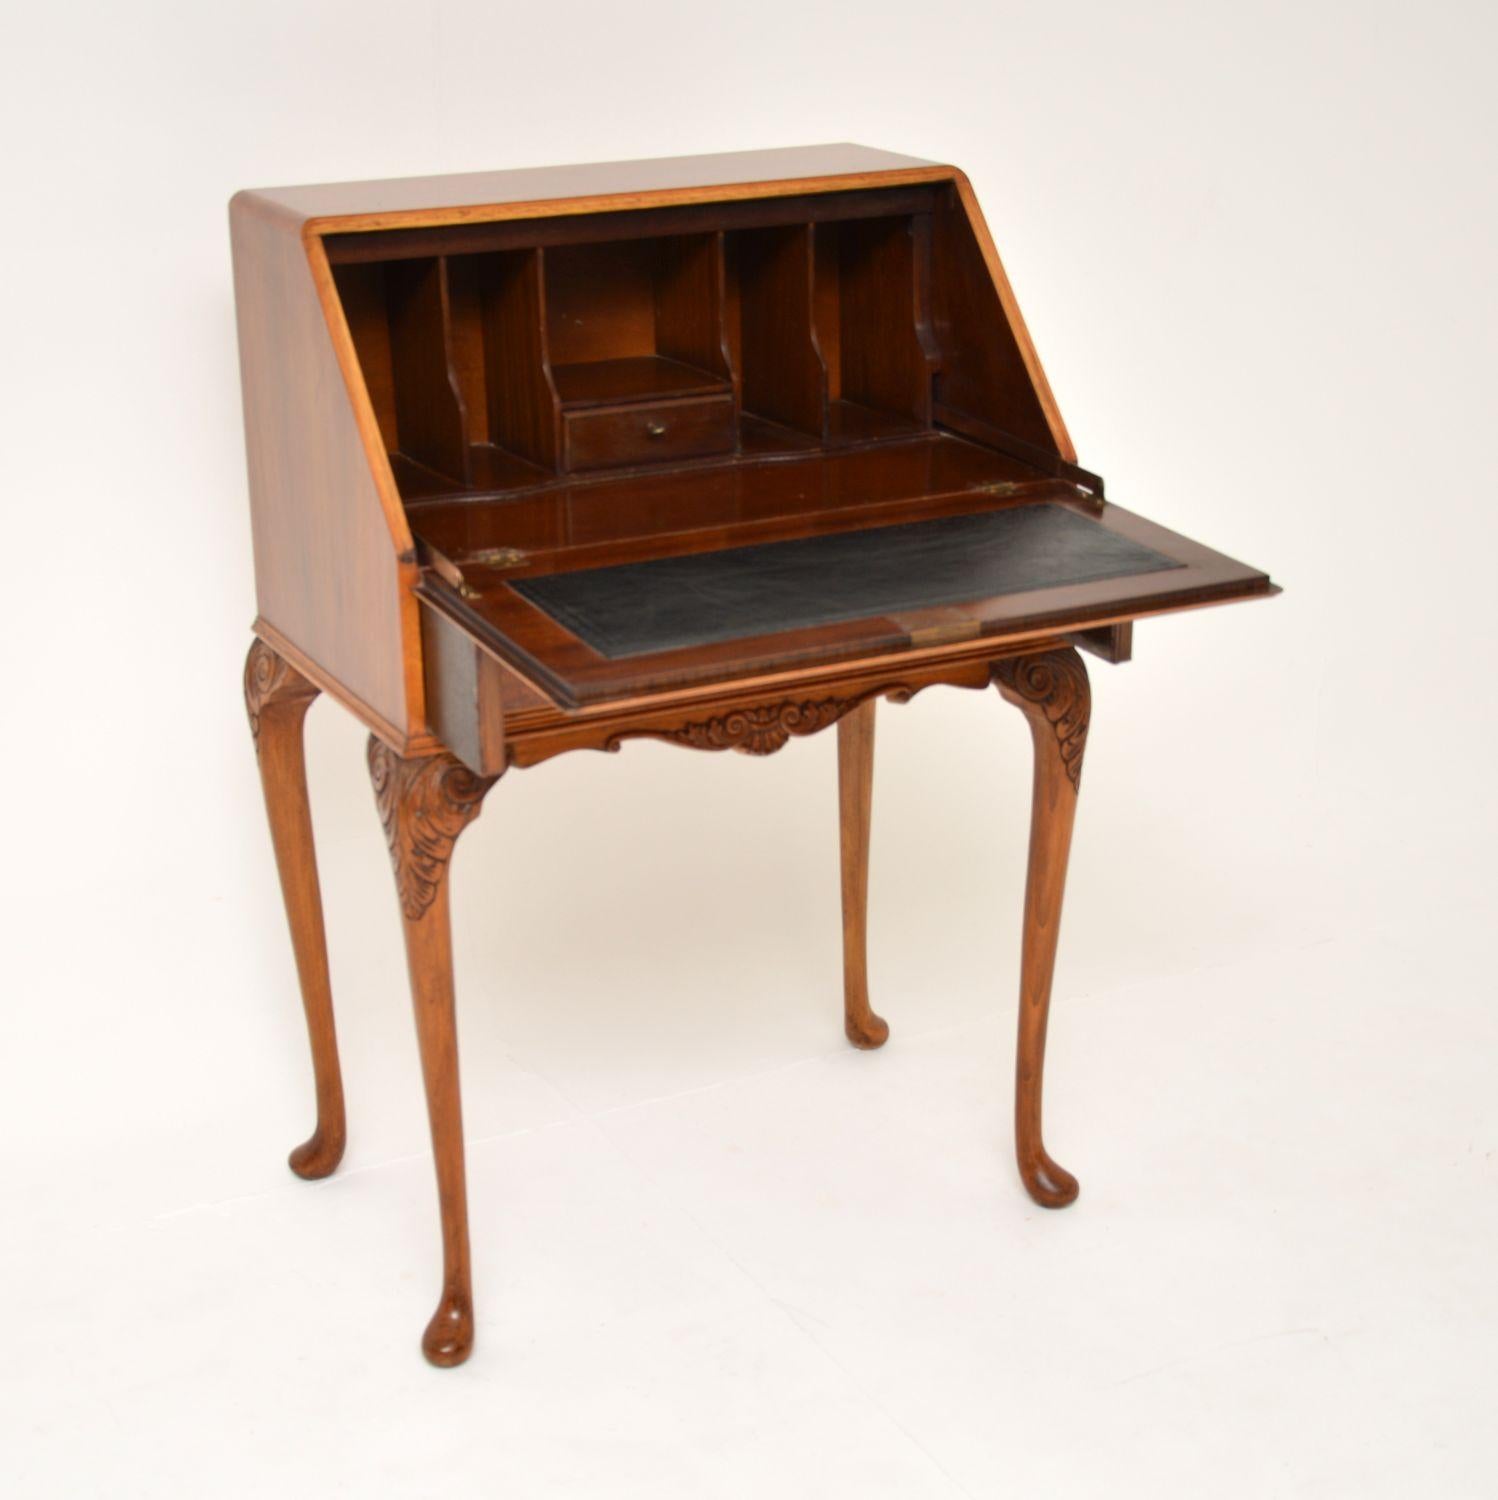 A beautiful antique burr walnut writing bureau in the Queen Anne style. This was made in England, it dates from around the 1930’s.

This is of excellent quality, with a gorgeous and elegant design. The burr walnut grain patterns are stunning